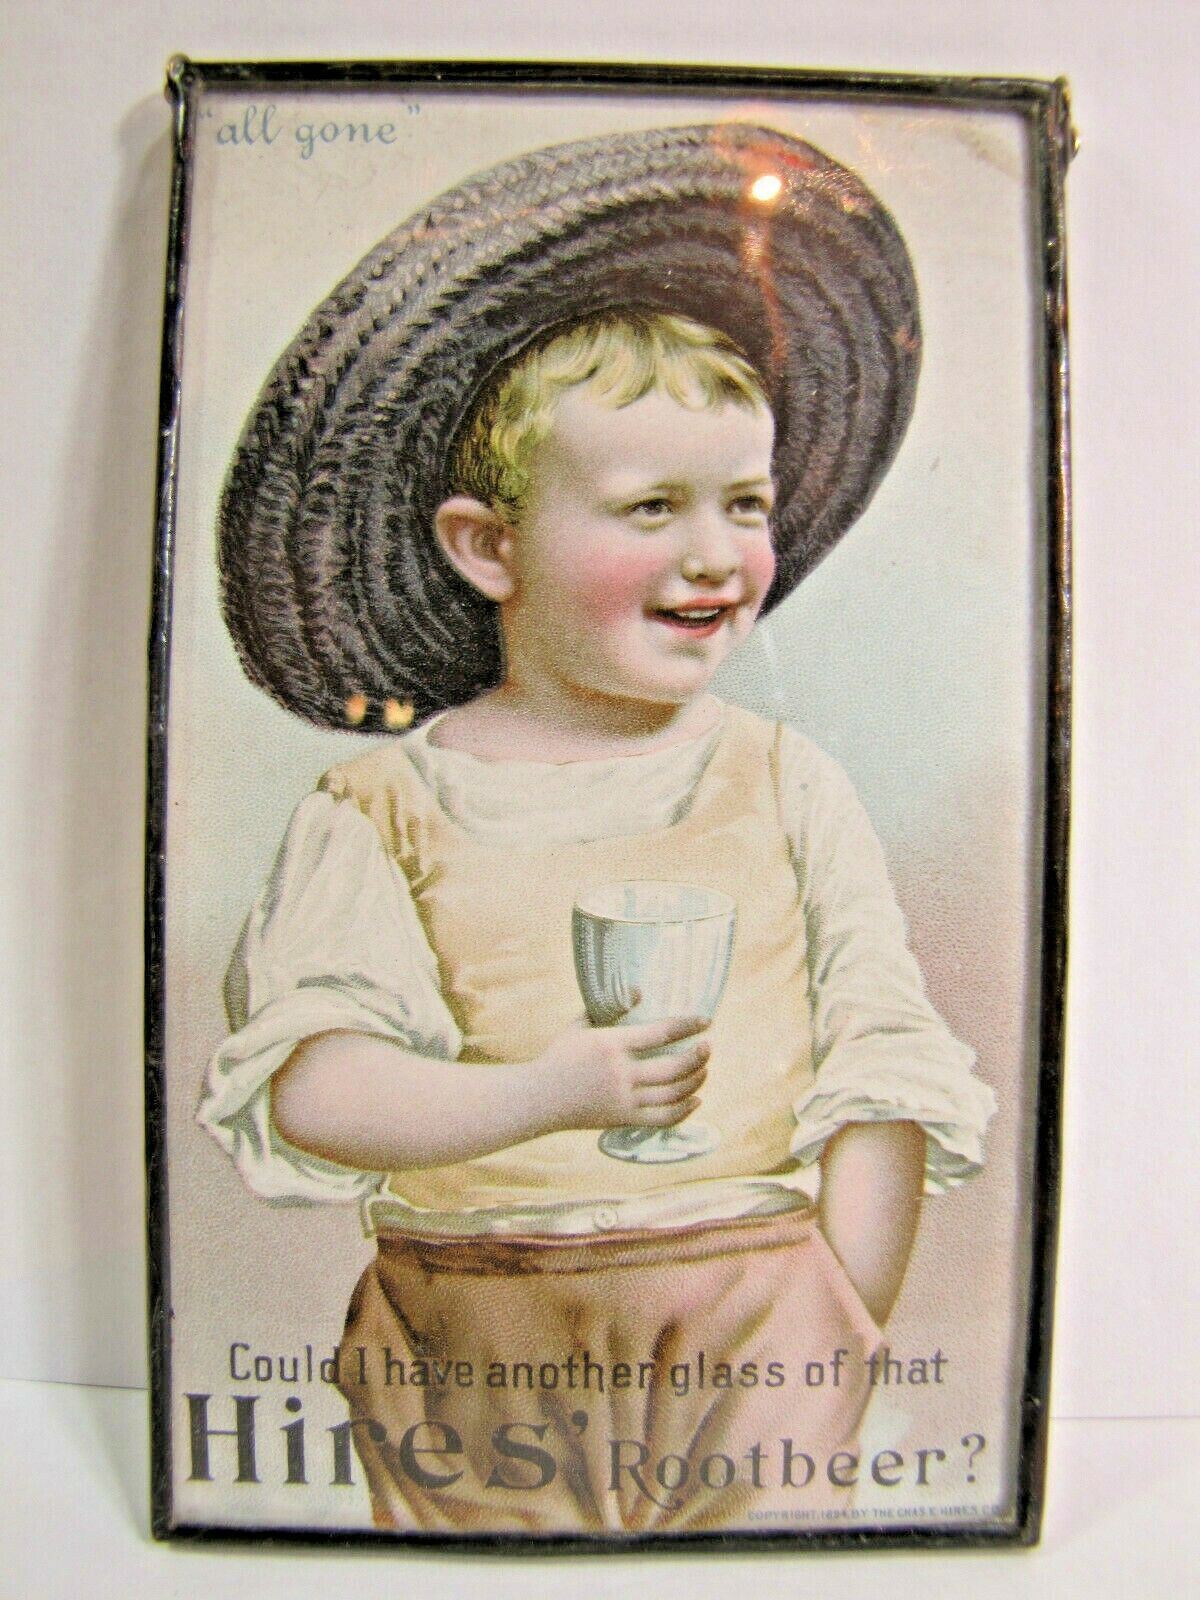 1890s HIRES ROOTBEER Advertising Trade Card Sign Ad Framed Under Glass Soda